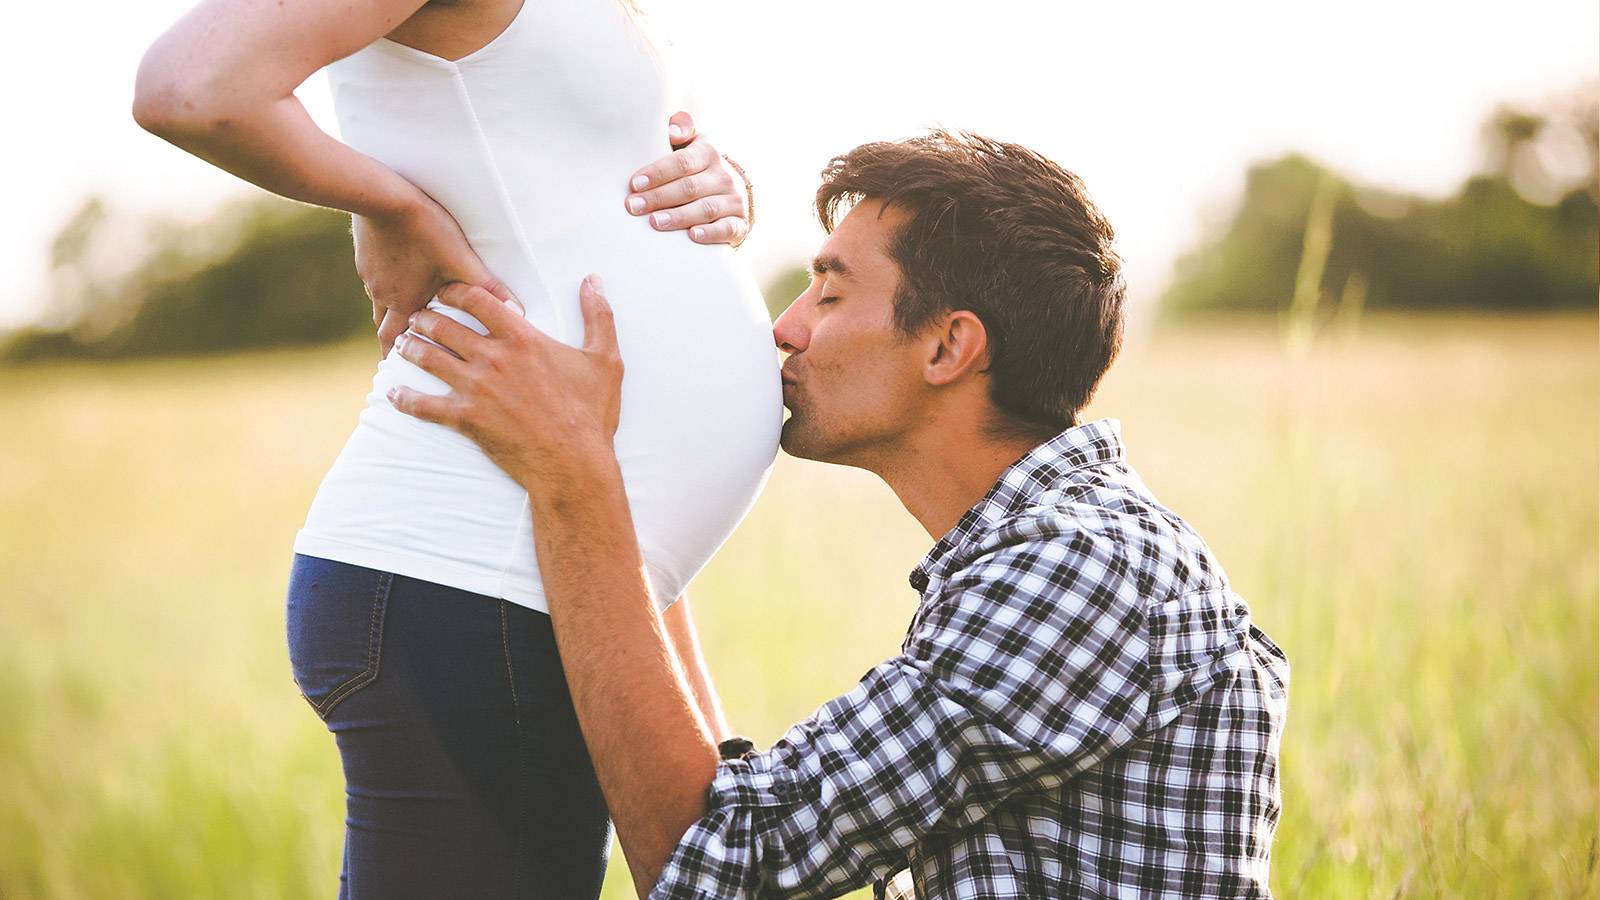 Pregnancy: What to Expect During Labour, Birth and Beyond